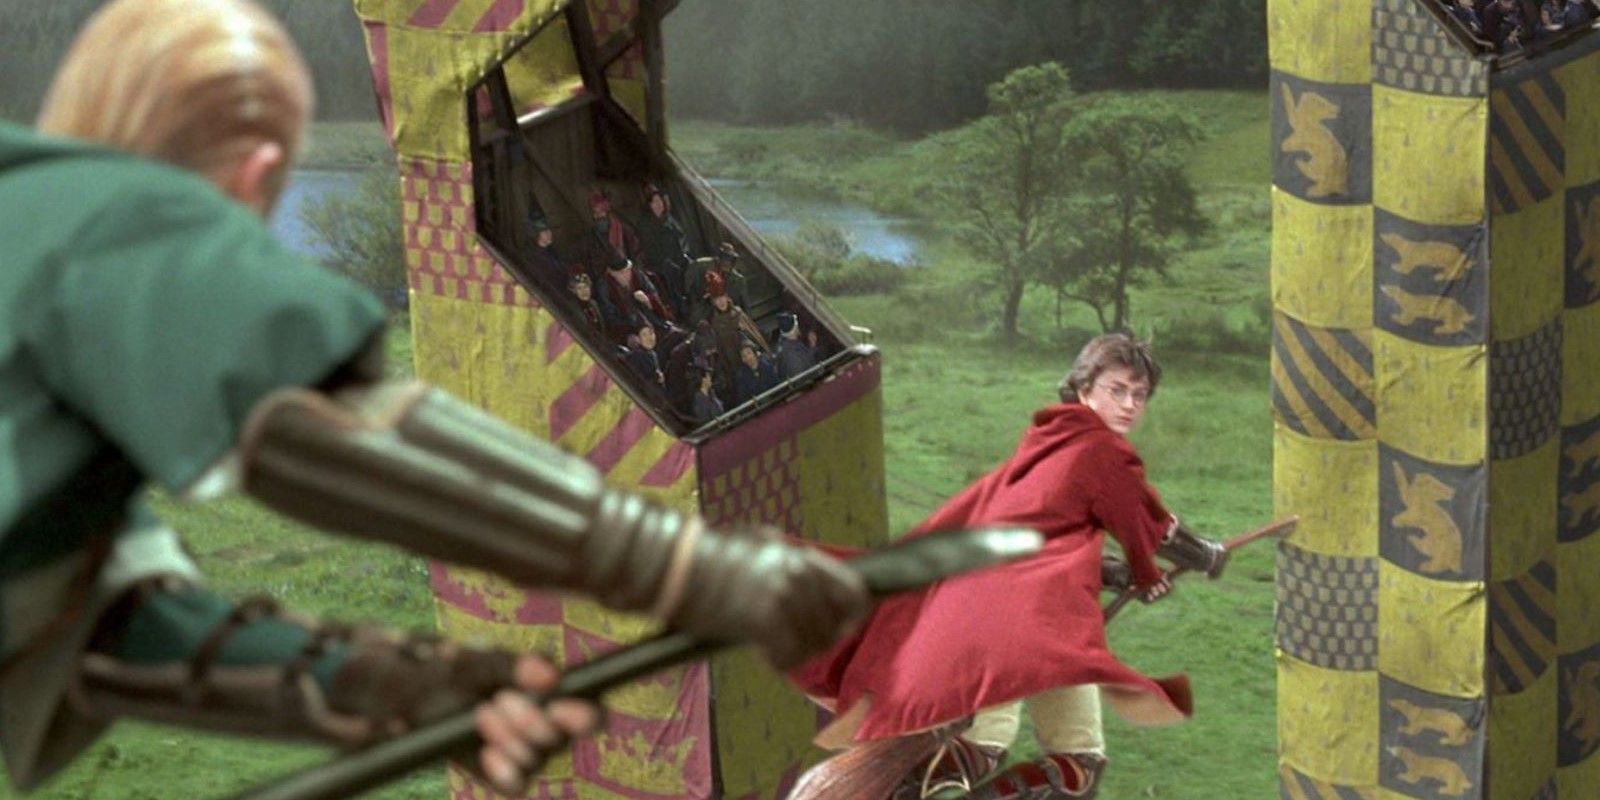 Malfoy approaches Harry on a broom during Quidditch